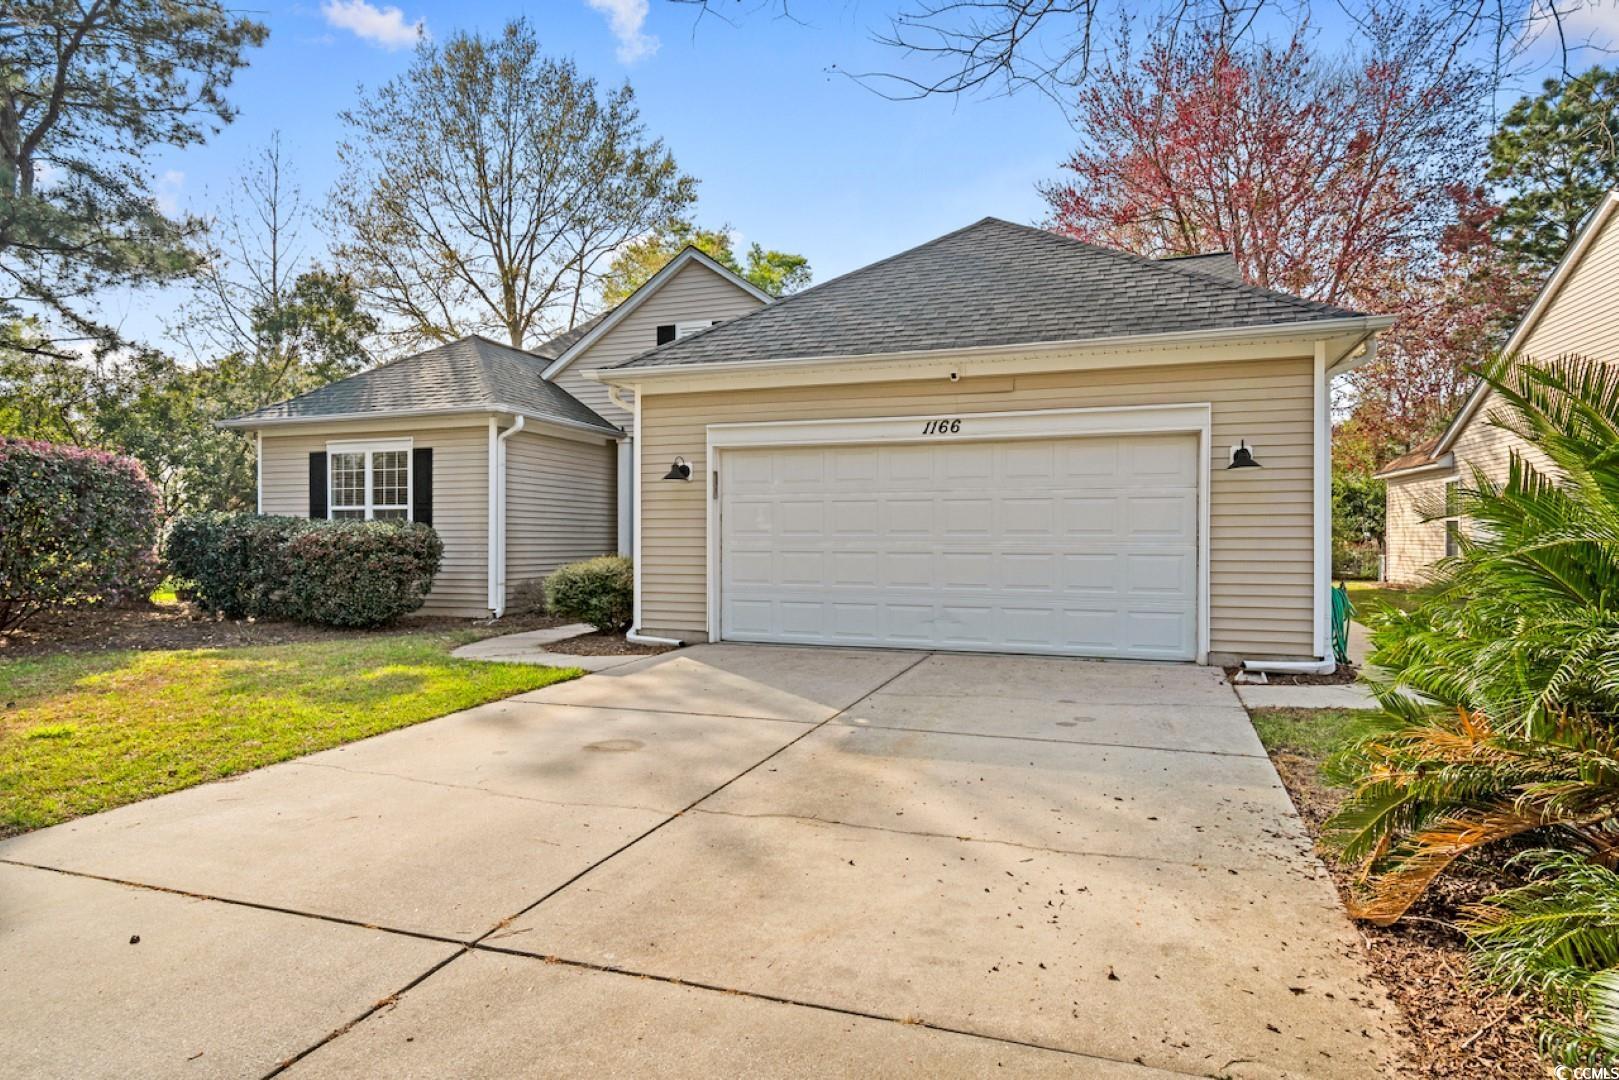 welcome home to this 3 bedroom, 2 bathroom home in the highly sought after community, muirfield at blackmoor in the heart of murrells inlet. this home features lvp flooring in every room along with a spacious open floor plan of the main living areas with a fireplace and built-in shelving on either side as a main focal point. the kitchen is equipped with all appliances, a work island, pantry for extra storage, a breakfast bar, and room for a breakfast table- separate from the more formal dining area. just off the living room are double doors leading to a room that could be an office, playroom, guest room- the options are endless! each bedroom offers a ceiling fan, plenty of closet space, and easy access to a bathroom, while the master also offers double tray ceilings, a walk-in closet and private master bath with double sink vanities, garden jetted tub, and separate shower. enjoy afternoons in your extended paver-patio with room for a fire-pit, a pergola, and multiple seating areas. spend your days socializing with friendly neighbors at the many community amenities- blackmoor offers a community pool, tennis courts, pickleball, prestigious golf courses, and is perfectly situated close to the area's schools, grocery stores, and all of the finest dining, shopping, and entertainment attractions including the famous marsh walk of murrells inlet. you won't want to miss this, schedule your showing today!